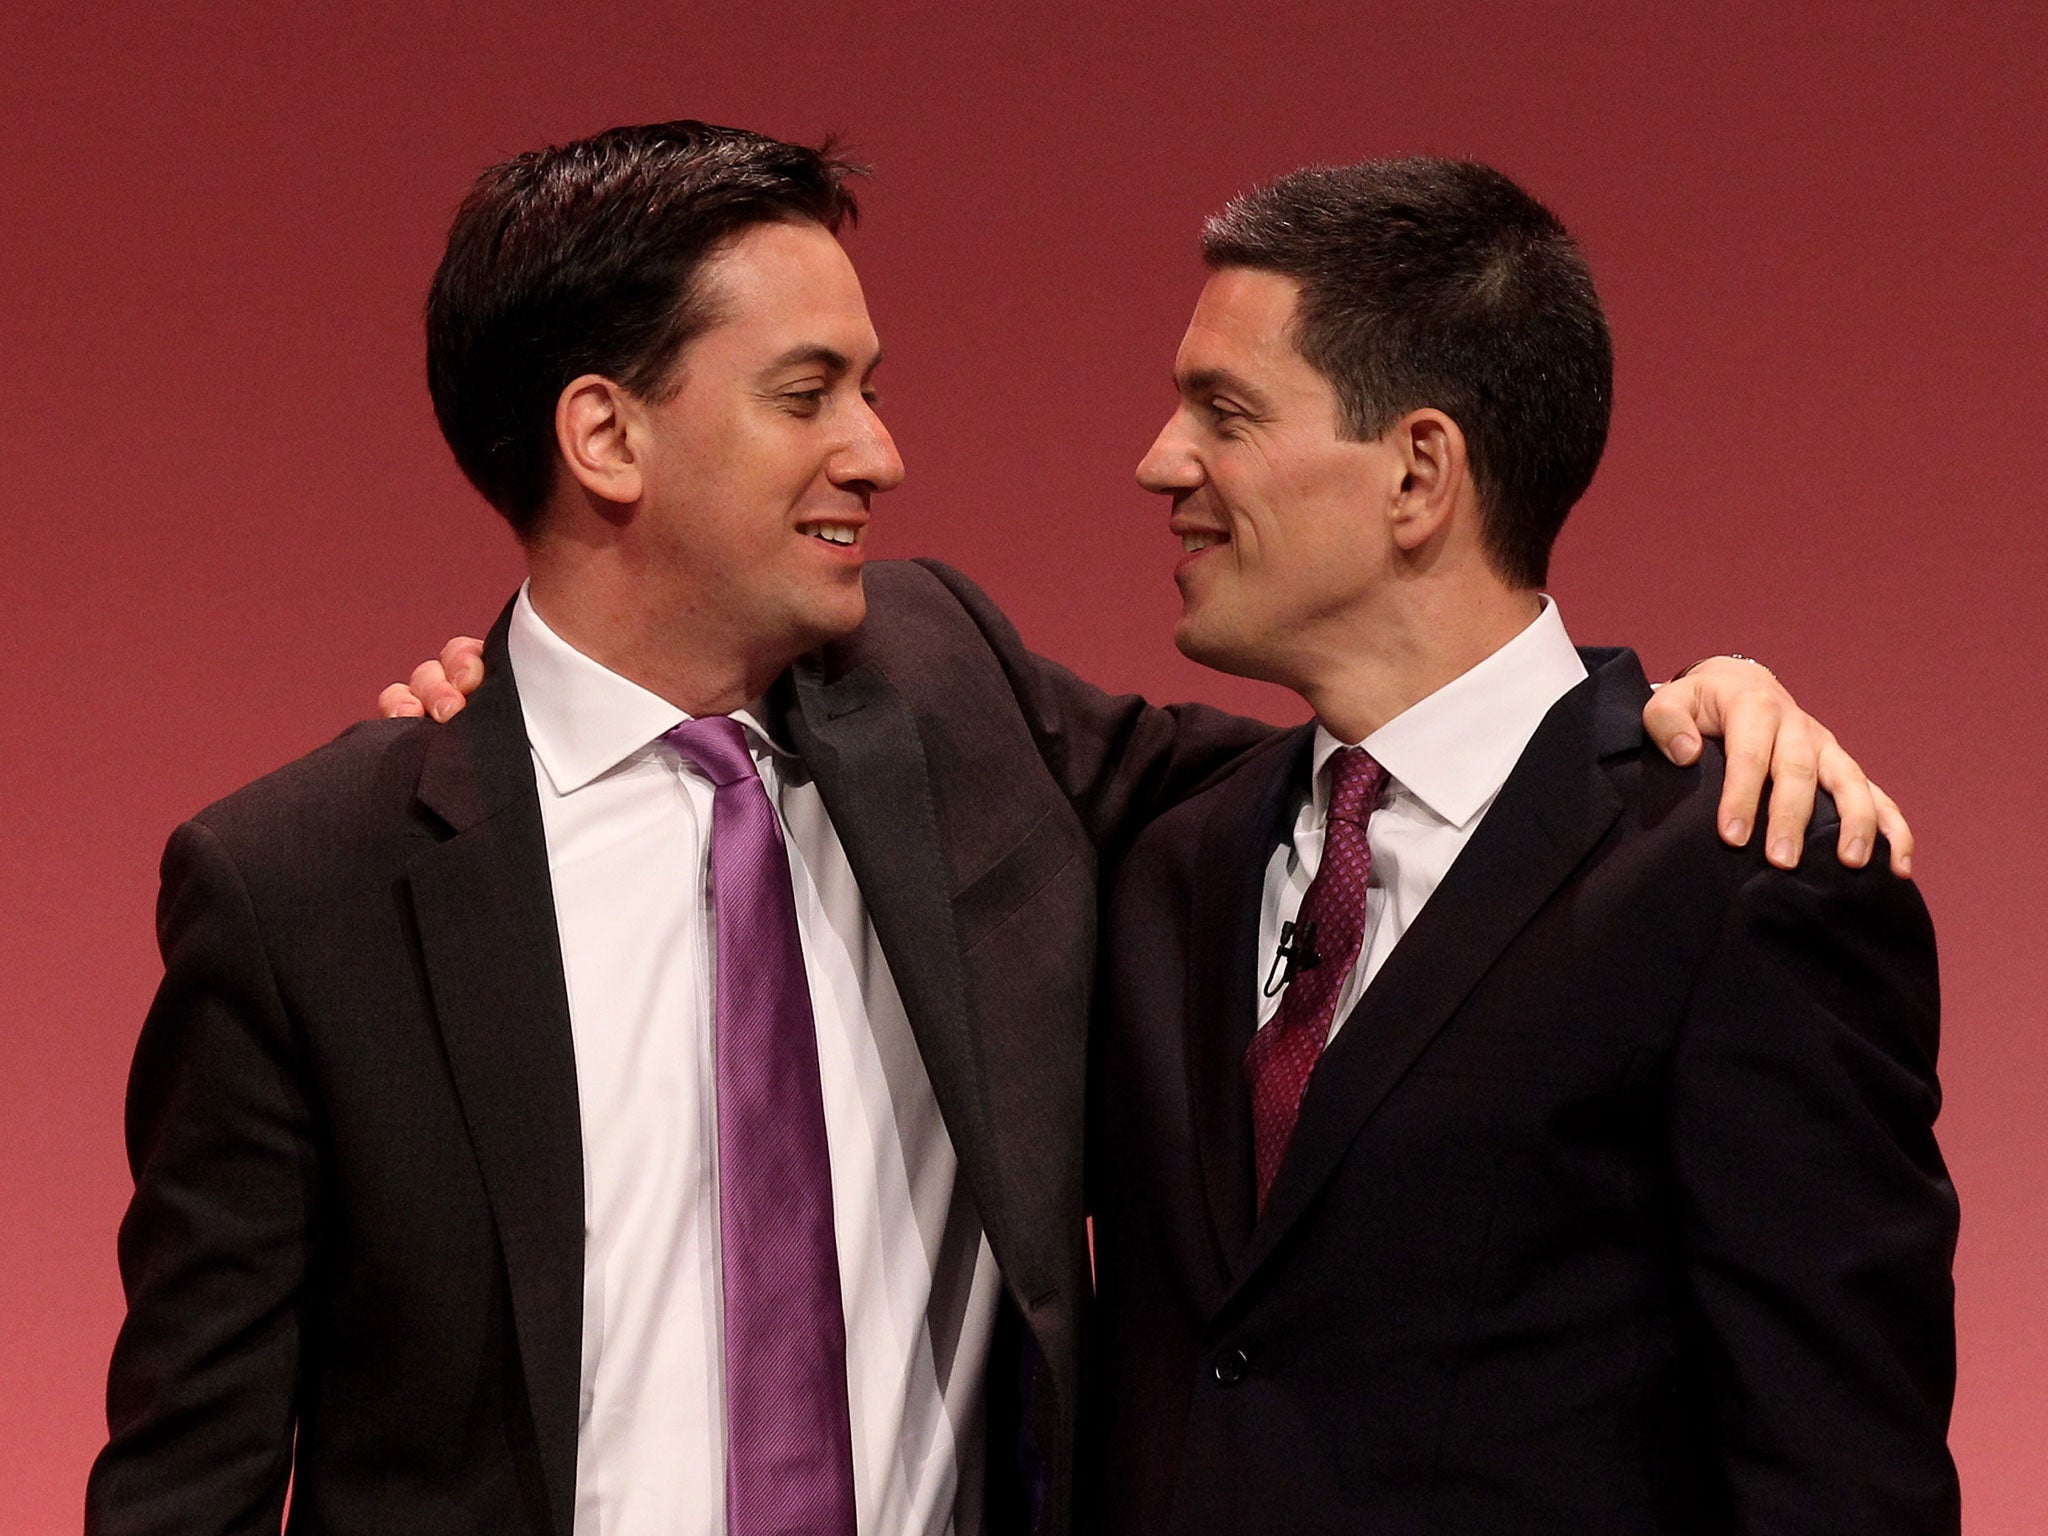 Ed and David Miliband: their leadership contest was fought under the old Labour Party rules